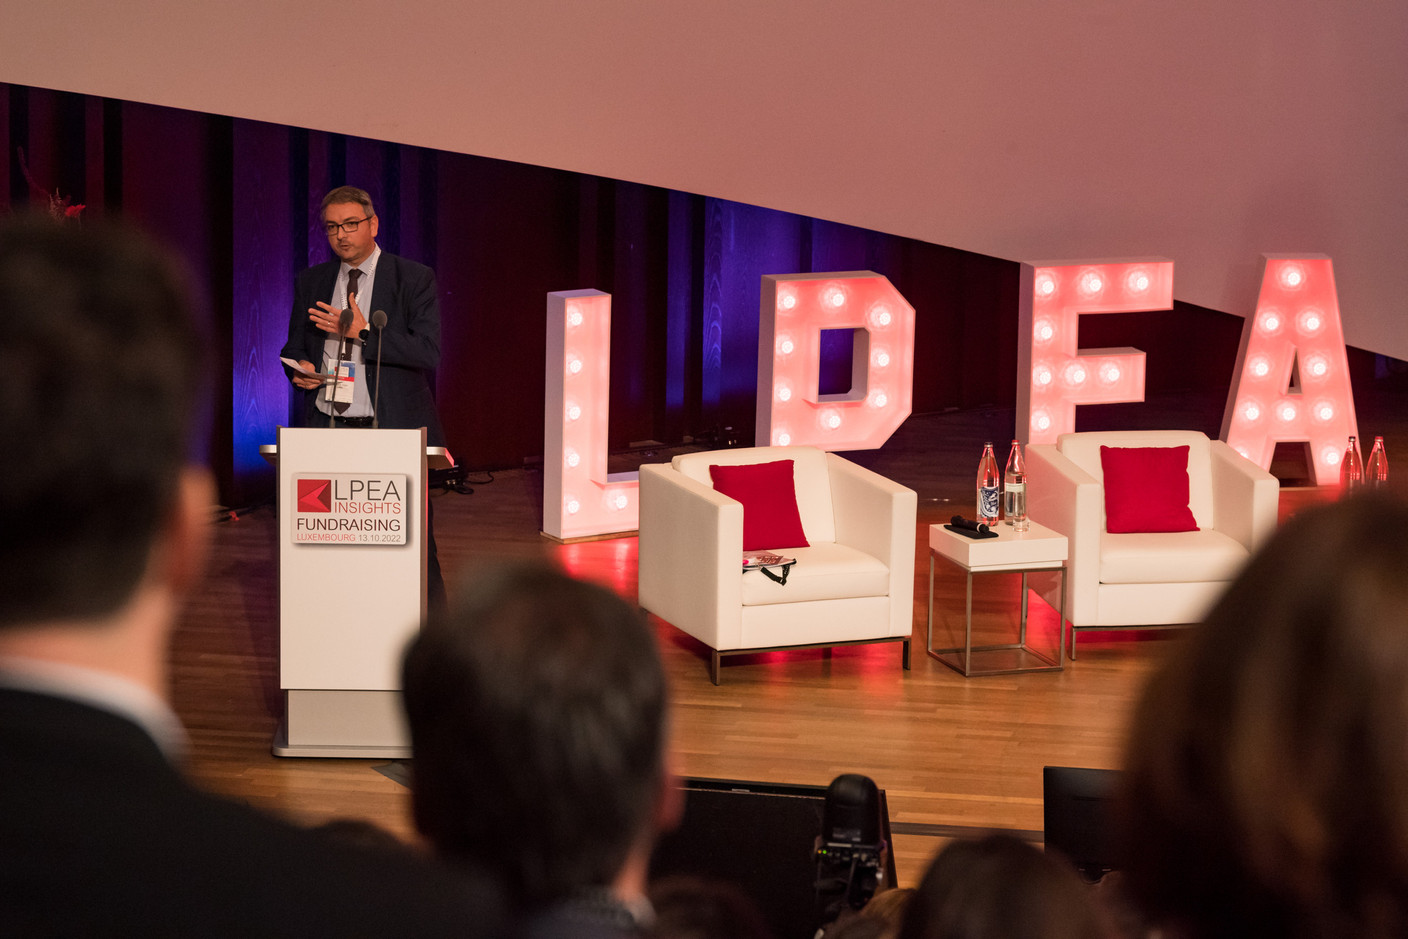 Stéphane Pesch, CEO of the Luxembourg Private Equity and Venture Capital Association, is seen speaking during LPEA Insights 2022, 13 October 2022. Photo: Nader Ghavami